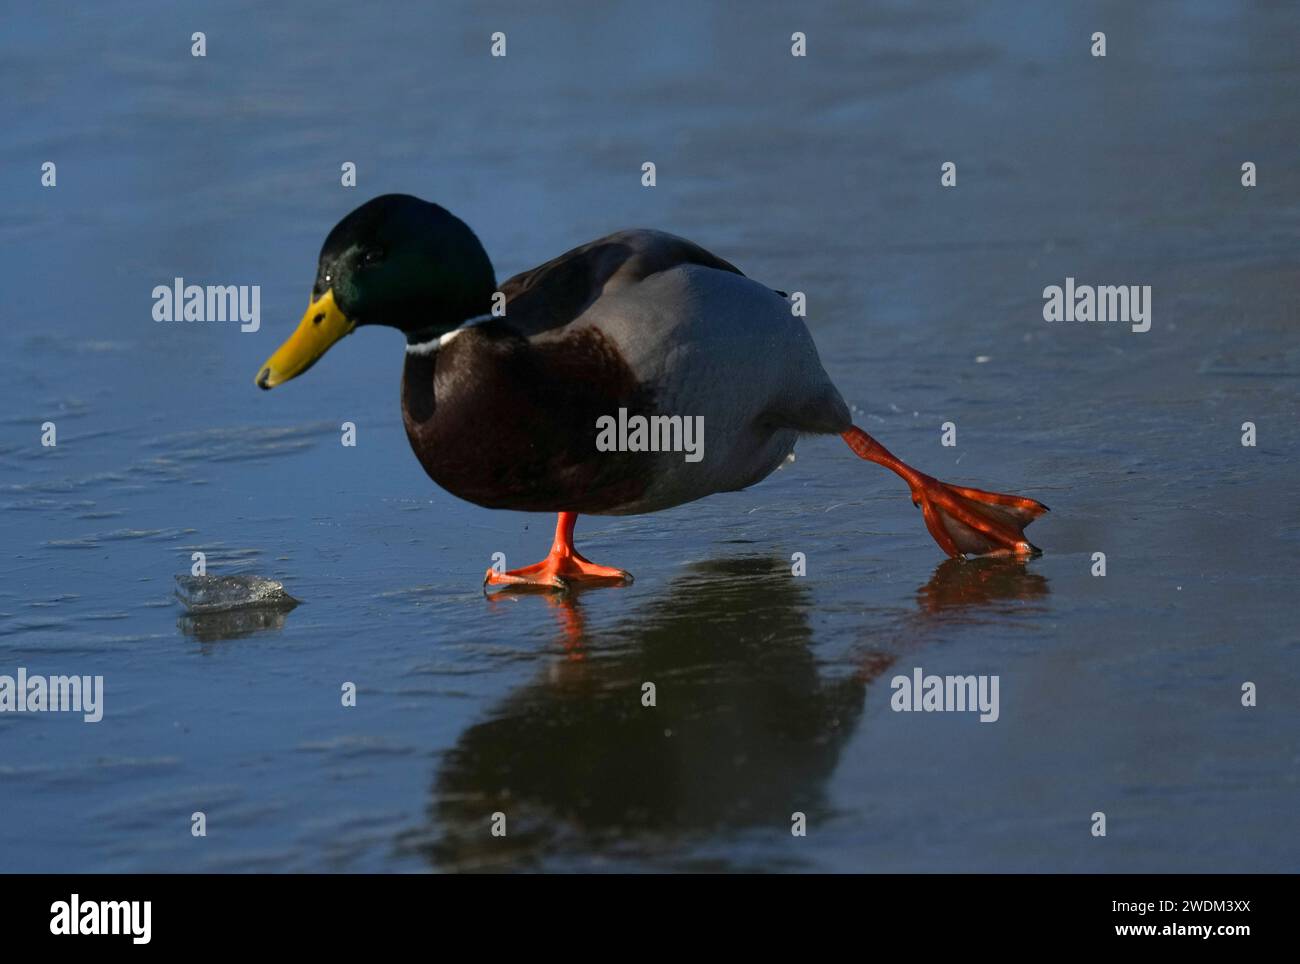 A duck slips on the ice on the frozen Jubilee Pond at Wanstead Flats in East London Stock Photo